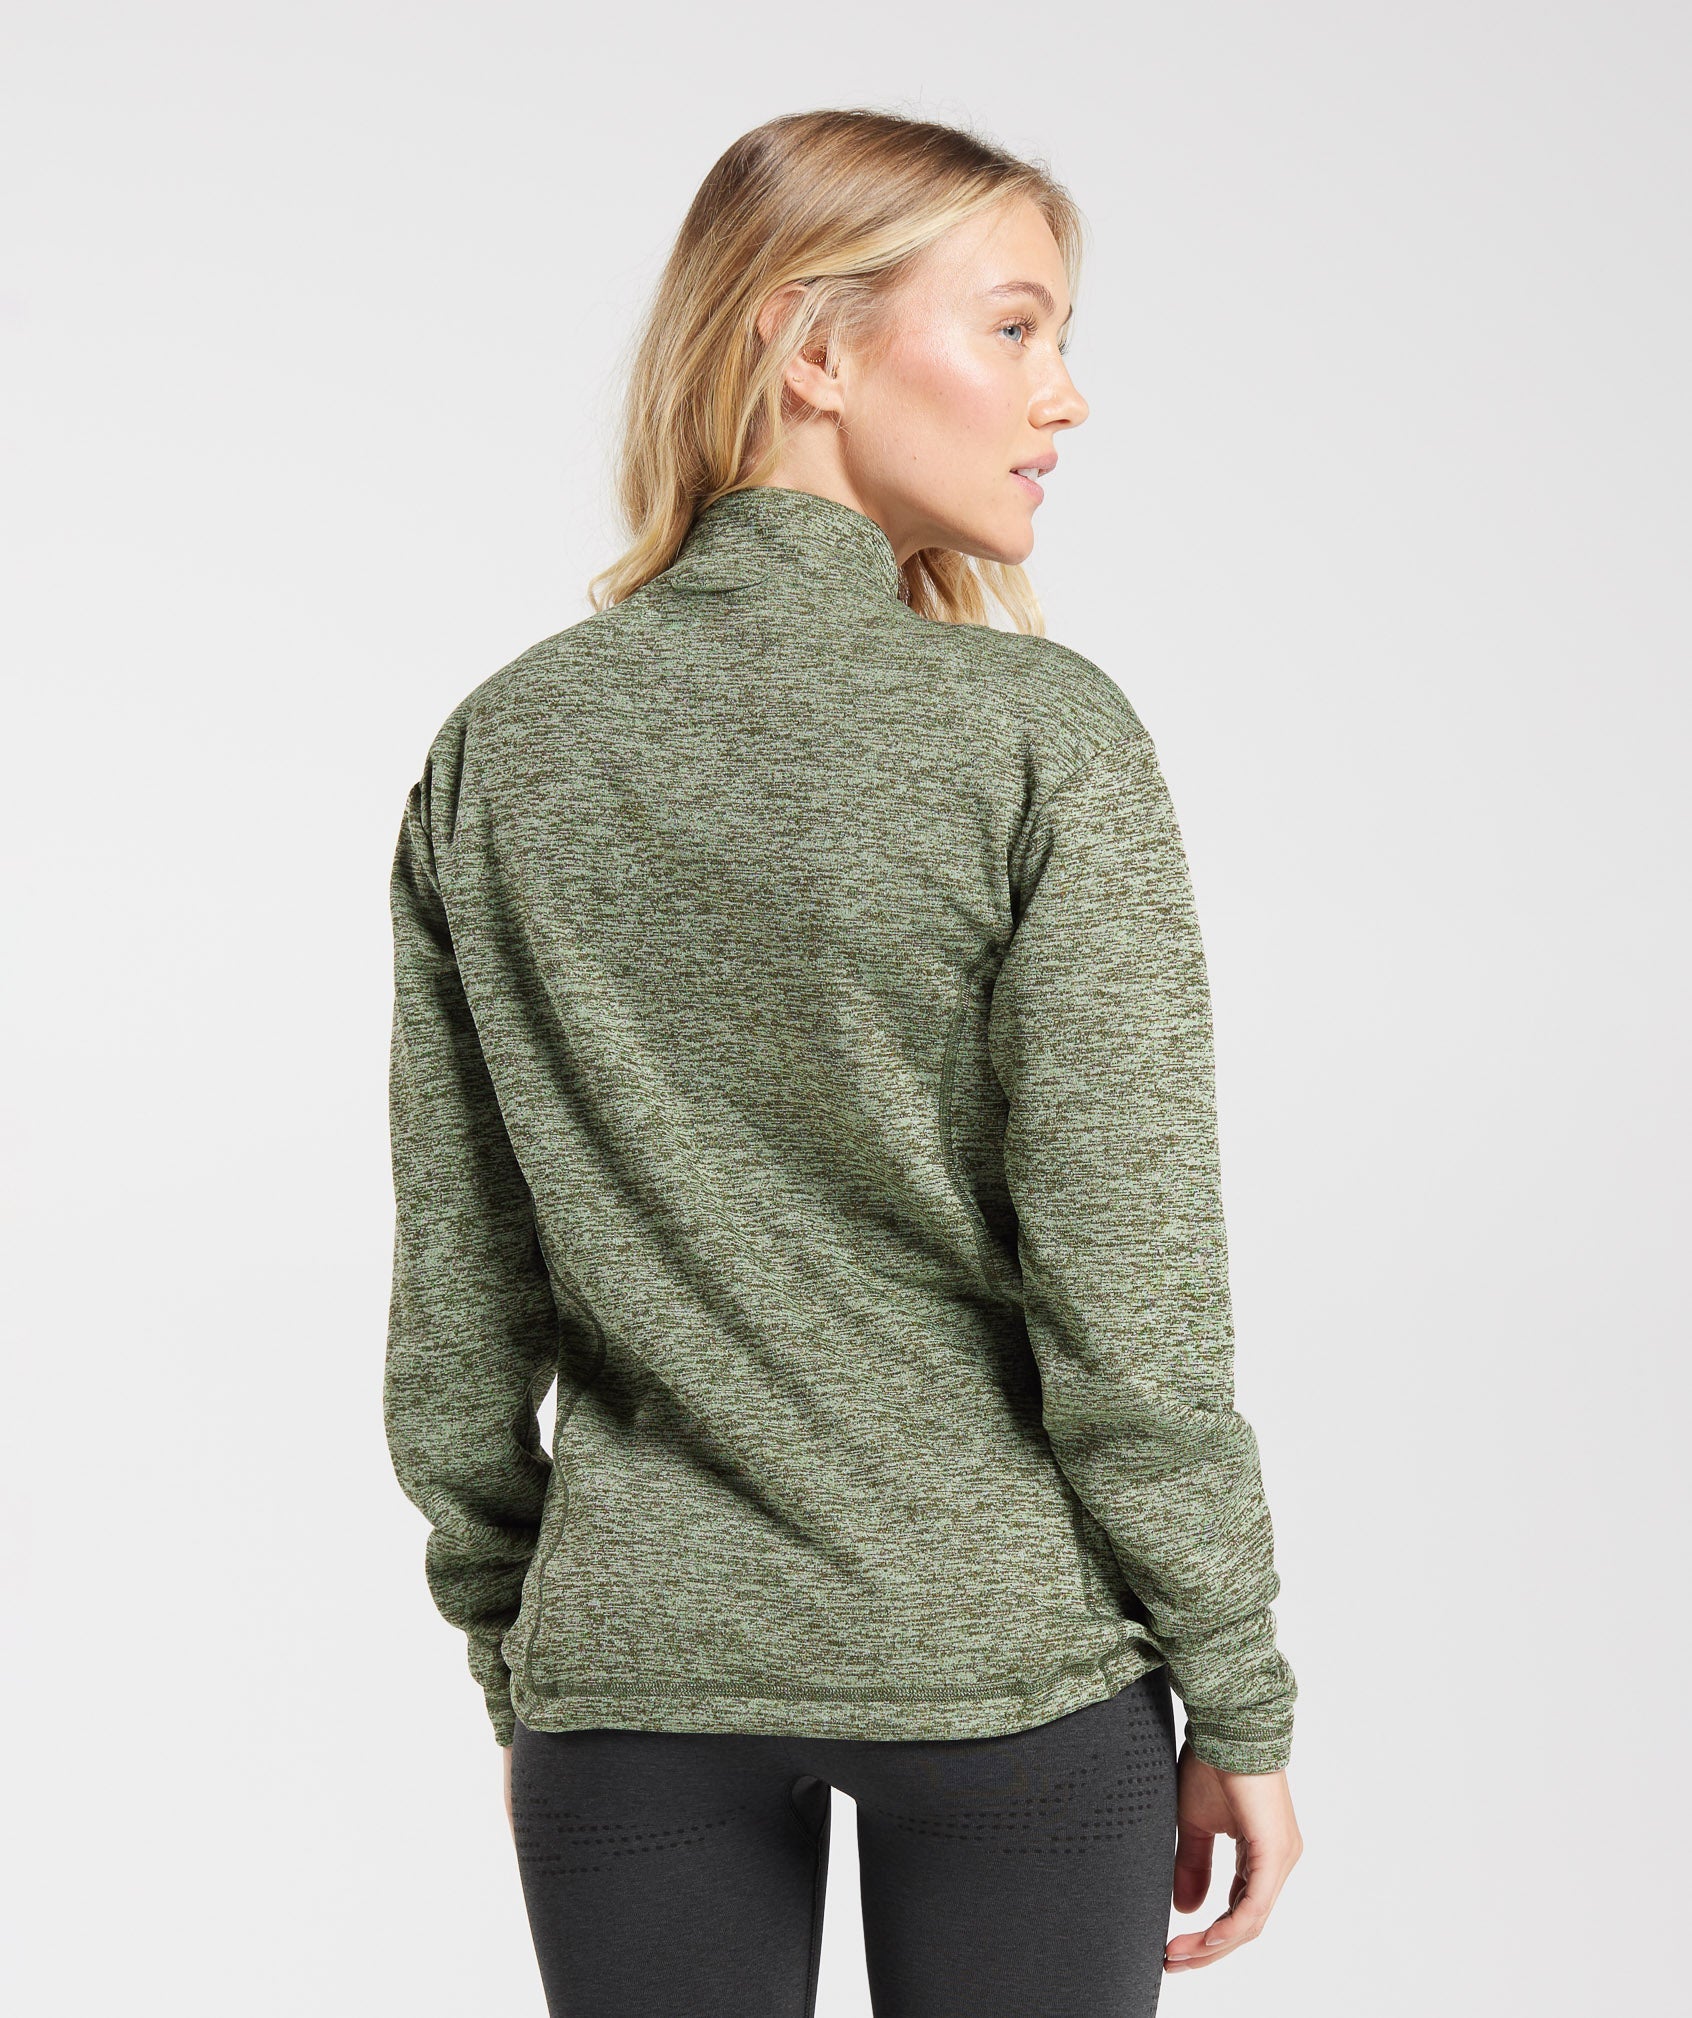 Thermal Fleece 1/4 Zip Pullover in Winter Olive/Light Sage Green - view 2